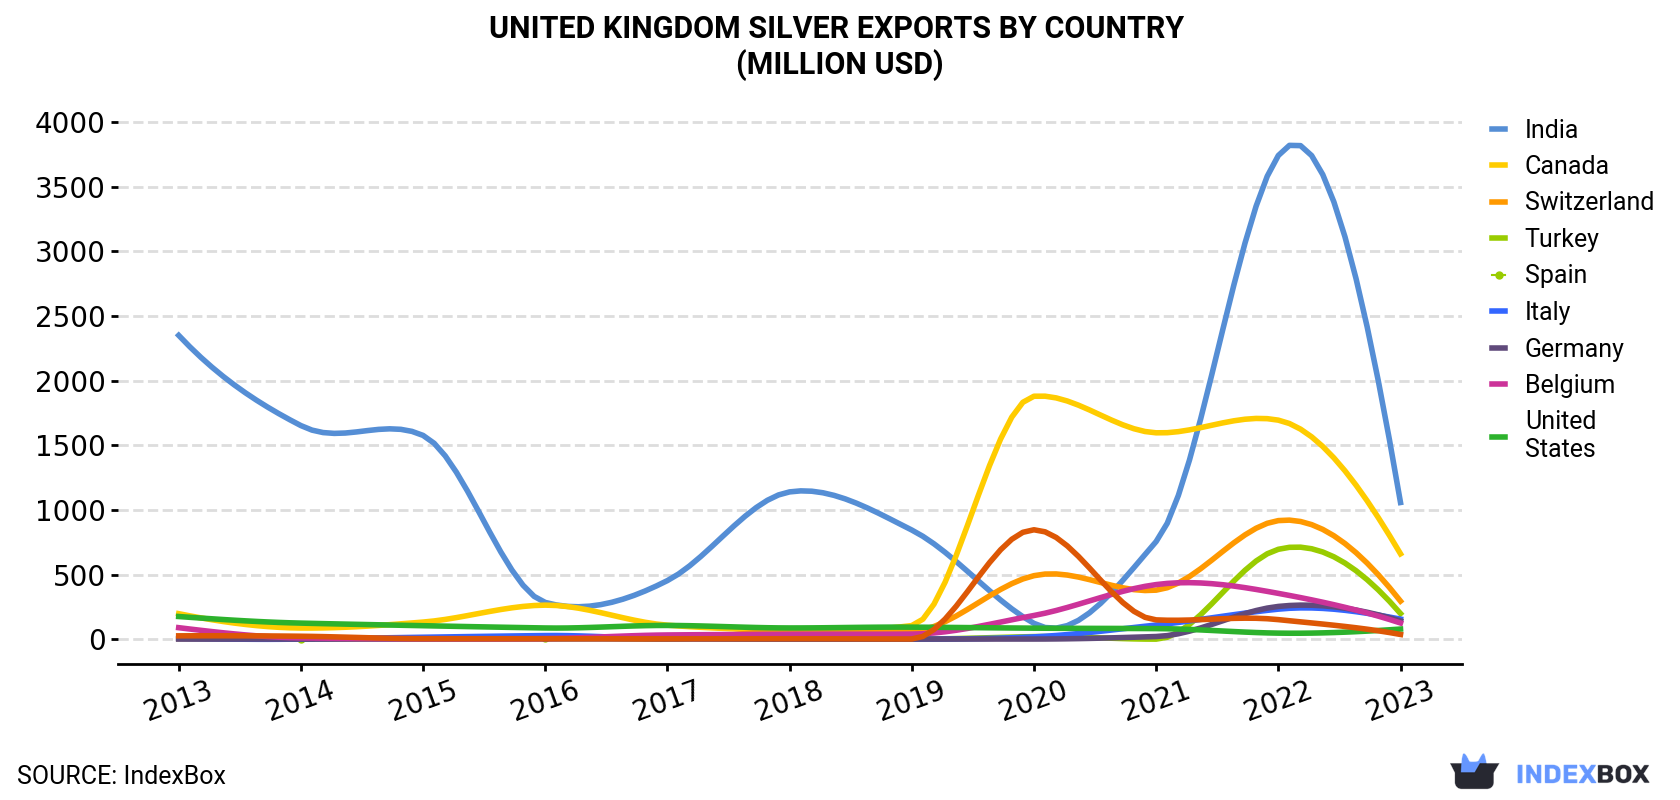 United Kingdom Silver Exports By Country (Million USD)